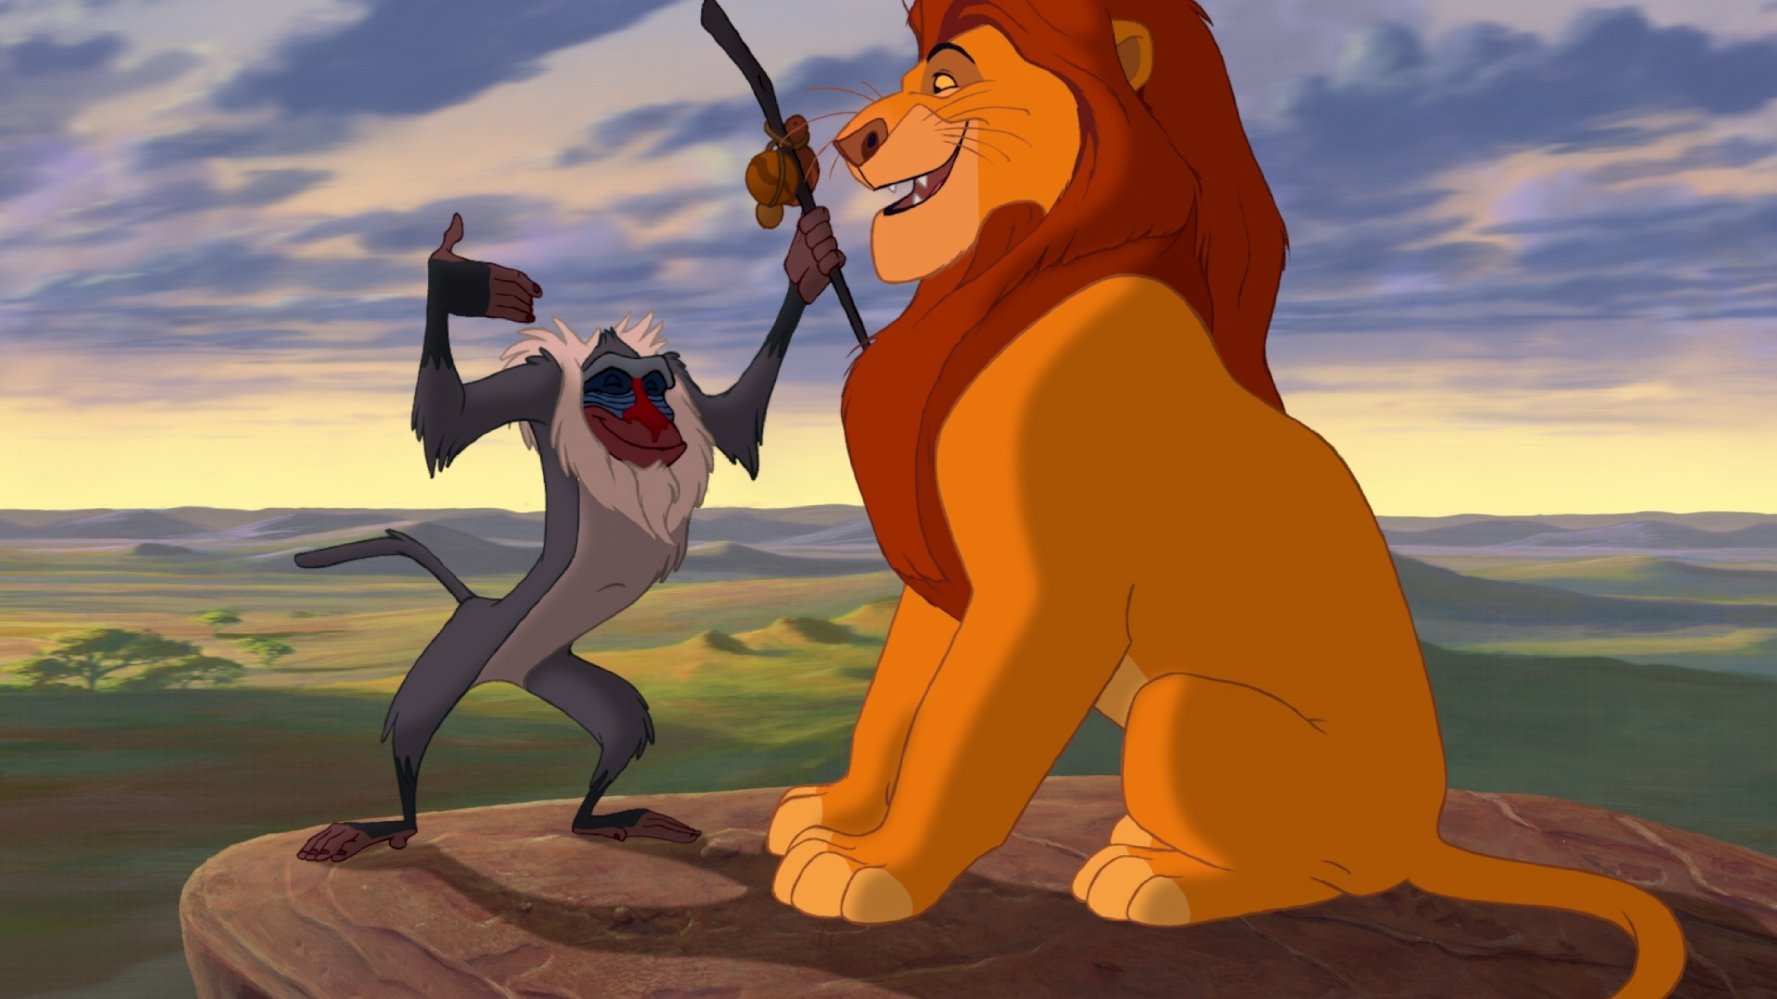 the lion king free online